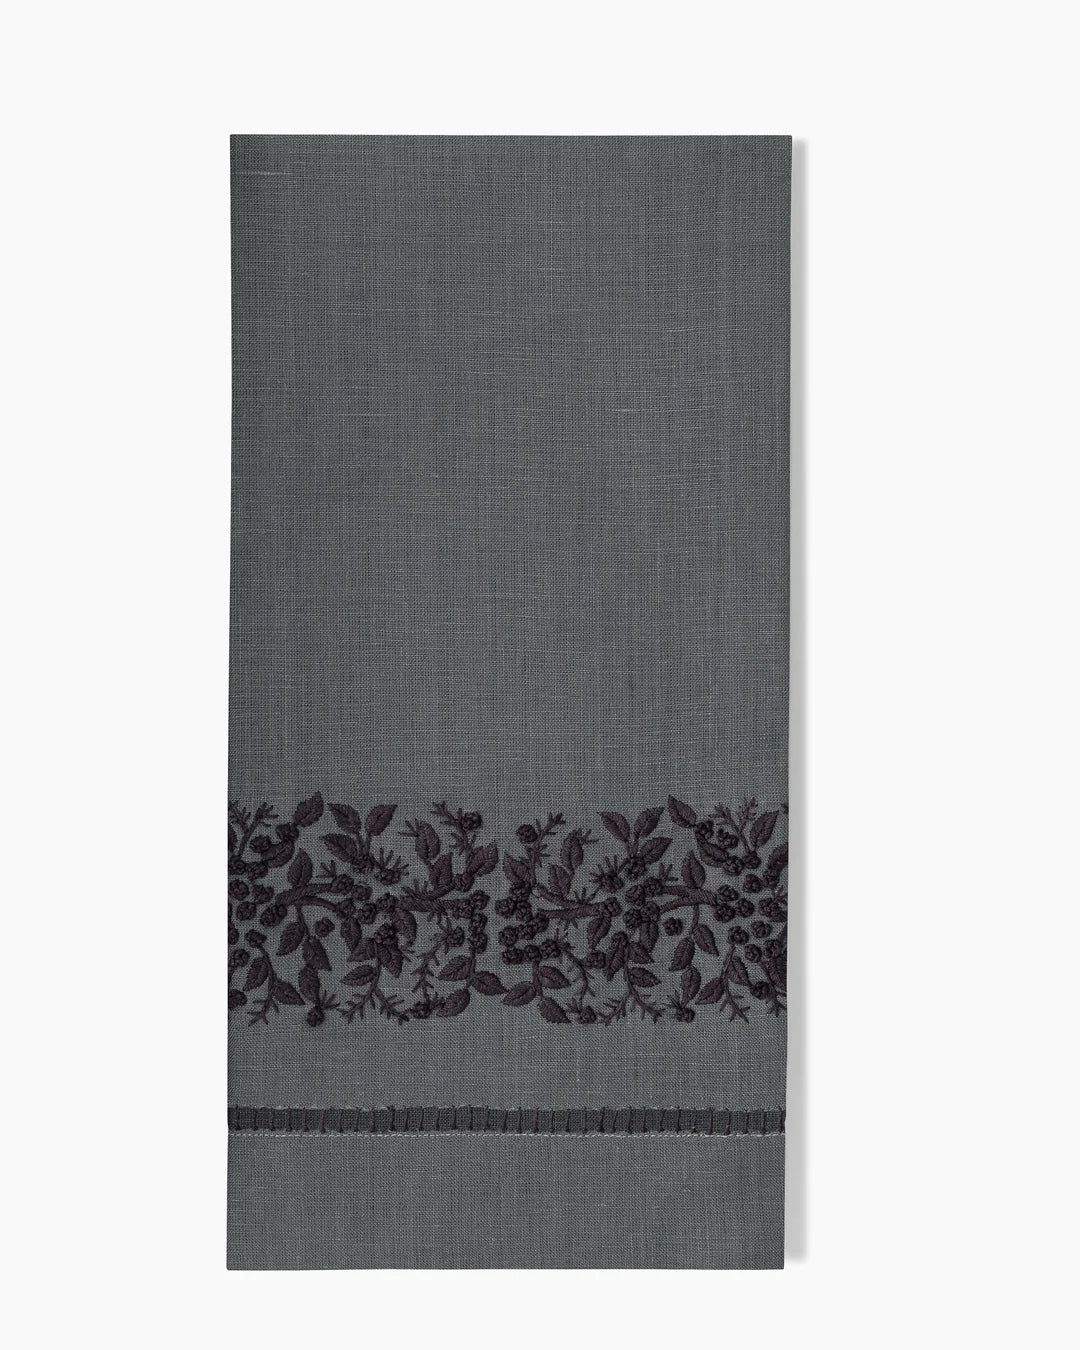 Jardin Monochrome Hand Towels in Charcoal, Set of Two